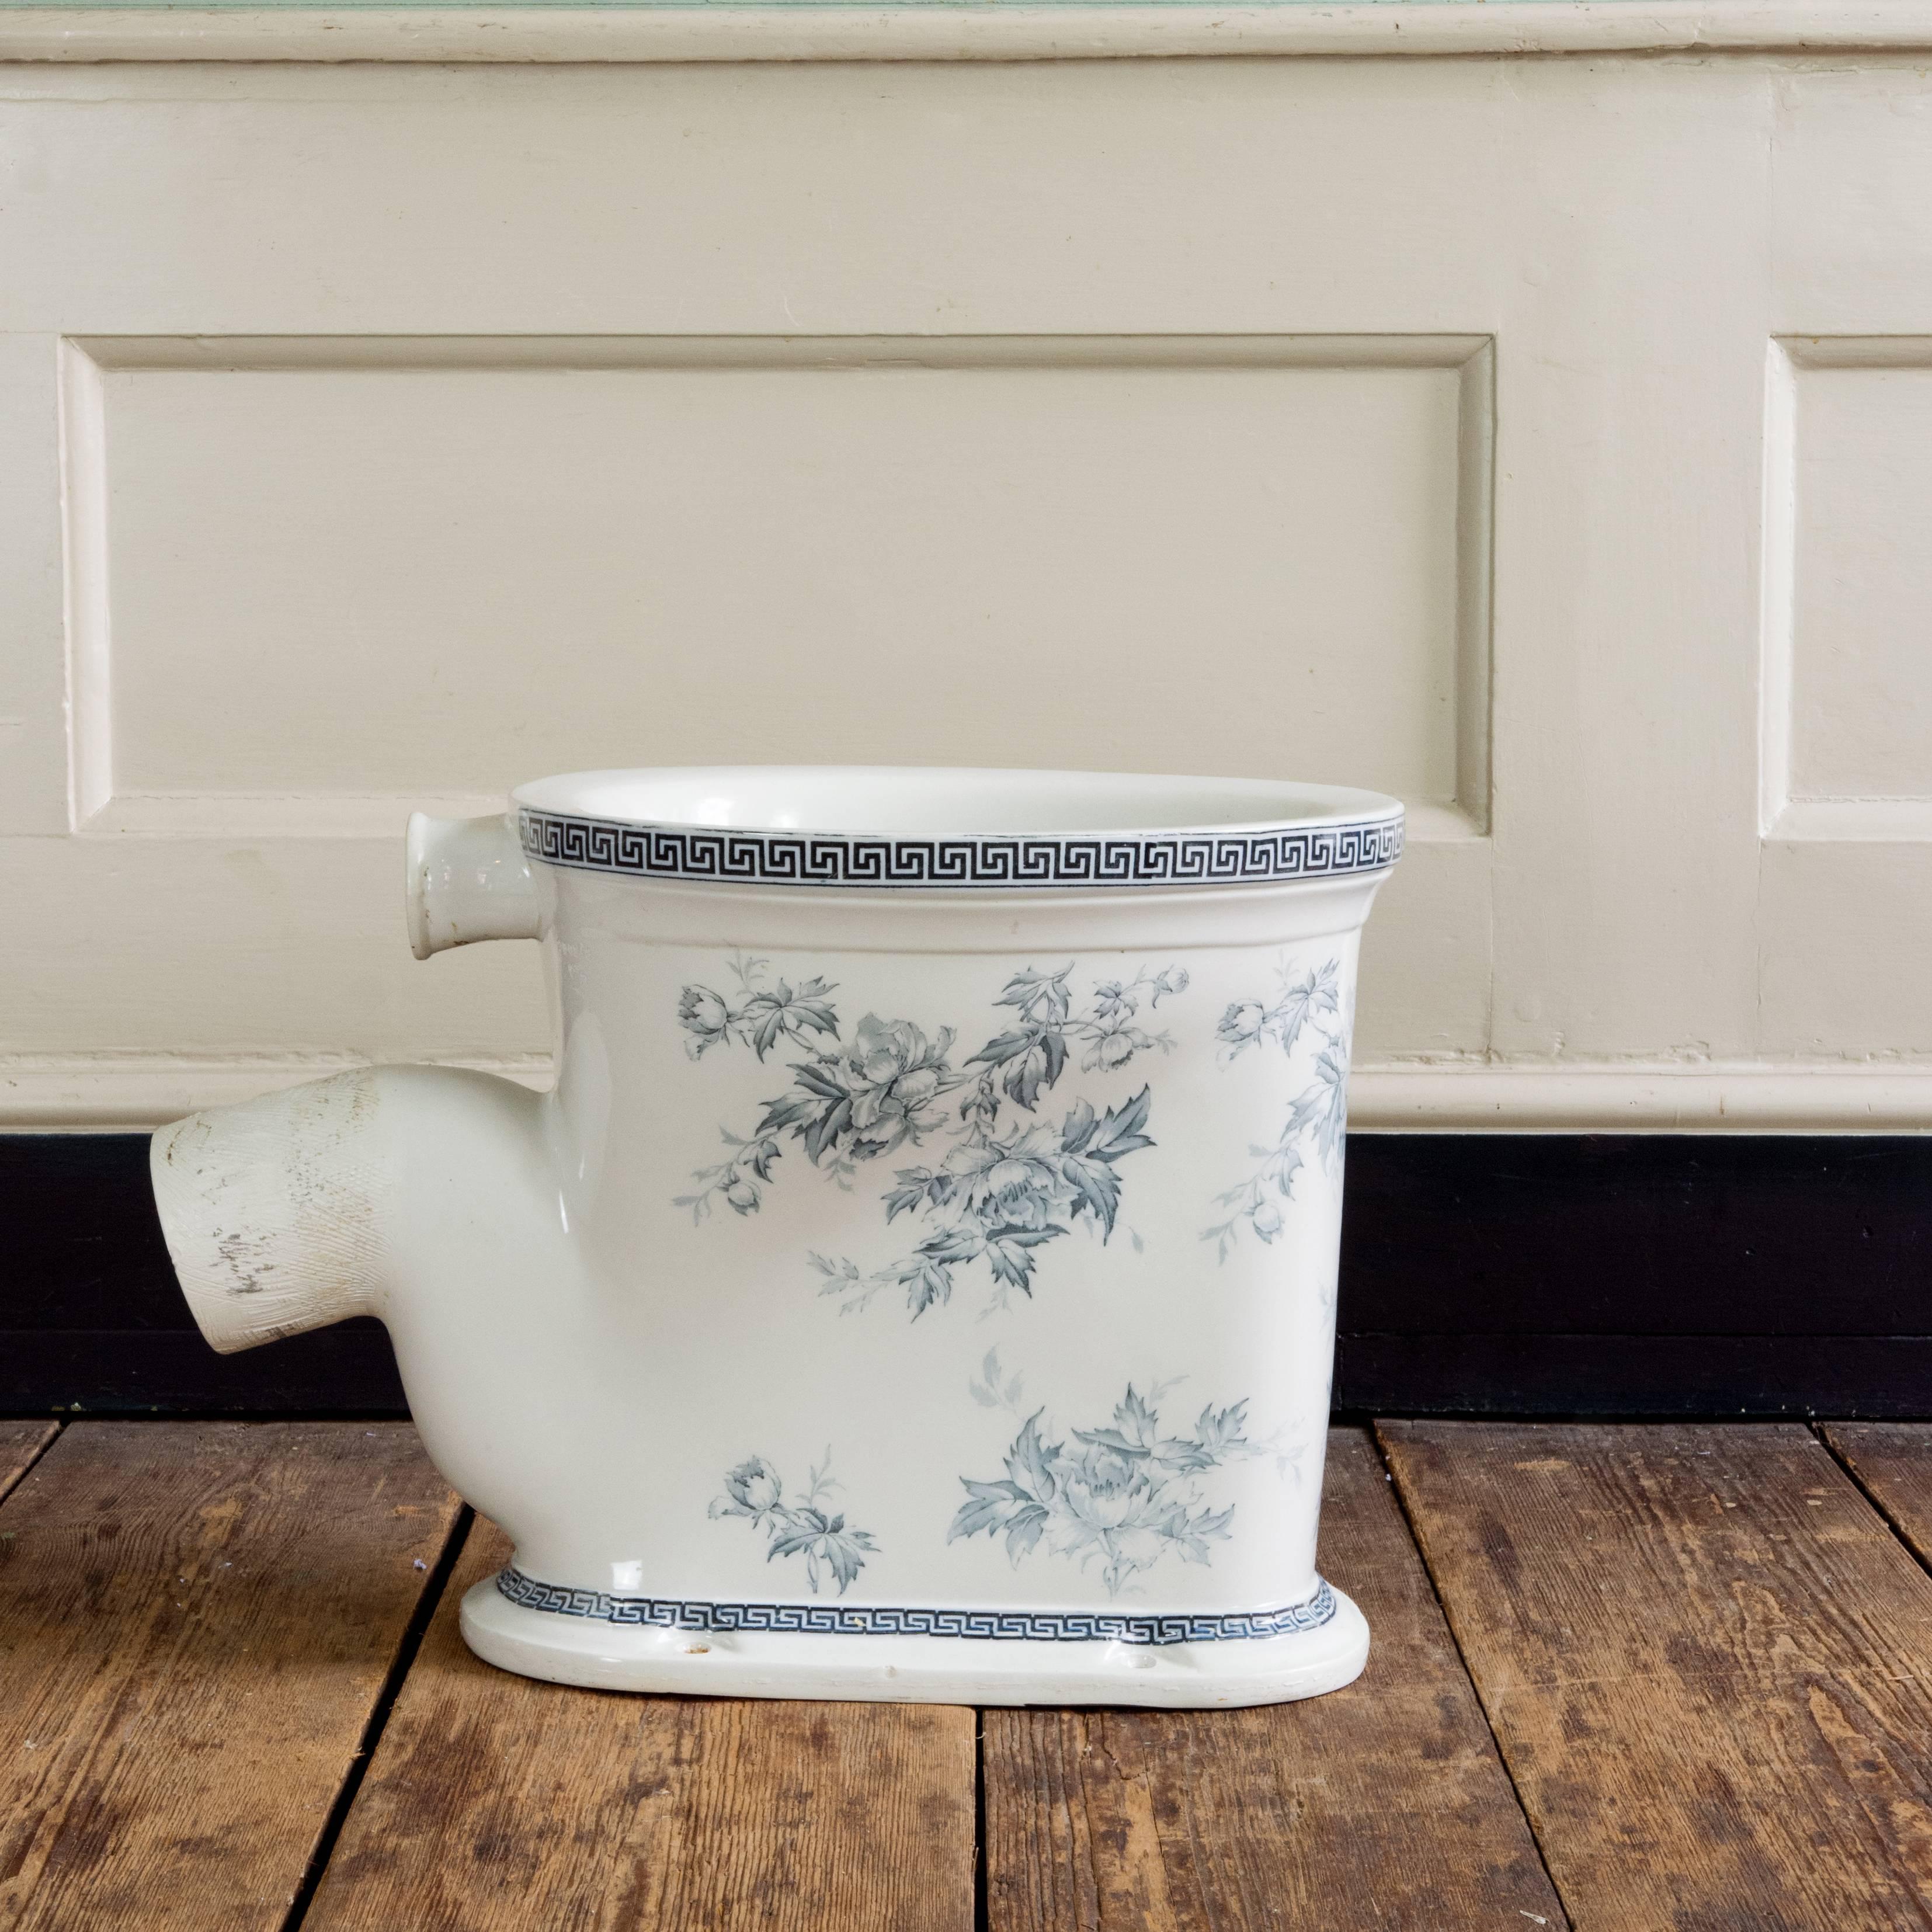 An Edwardian blue transfer printed toilet pan, 'The Velox Washdown Closet,'
the rim and base with Greek key border, the pedestal and interior with floral decoration, with P-trap outlet.

Dimensions: 40cm (15¾